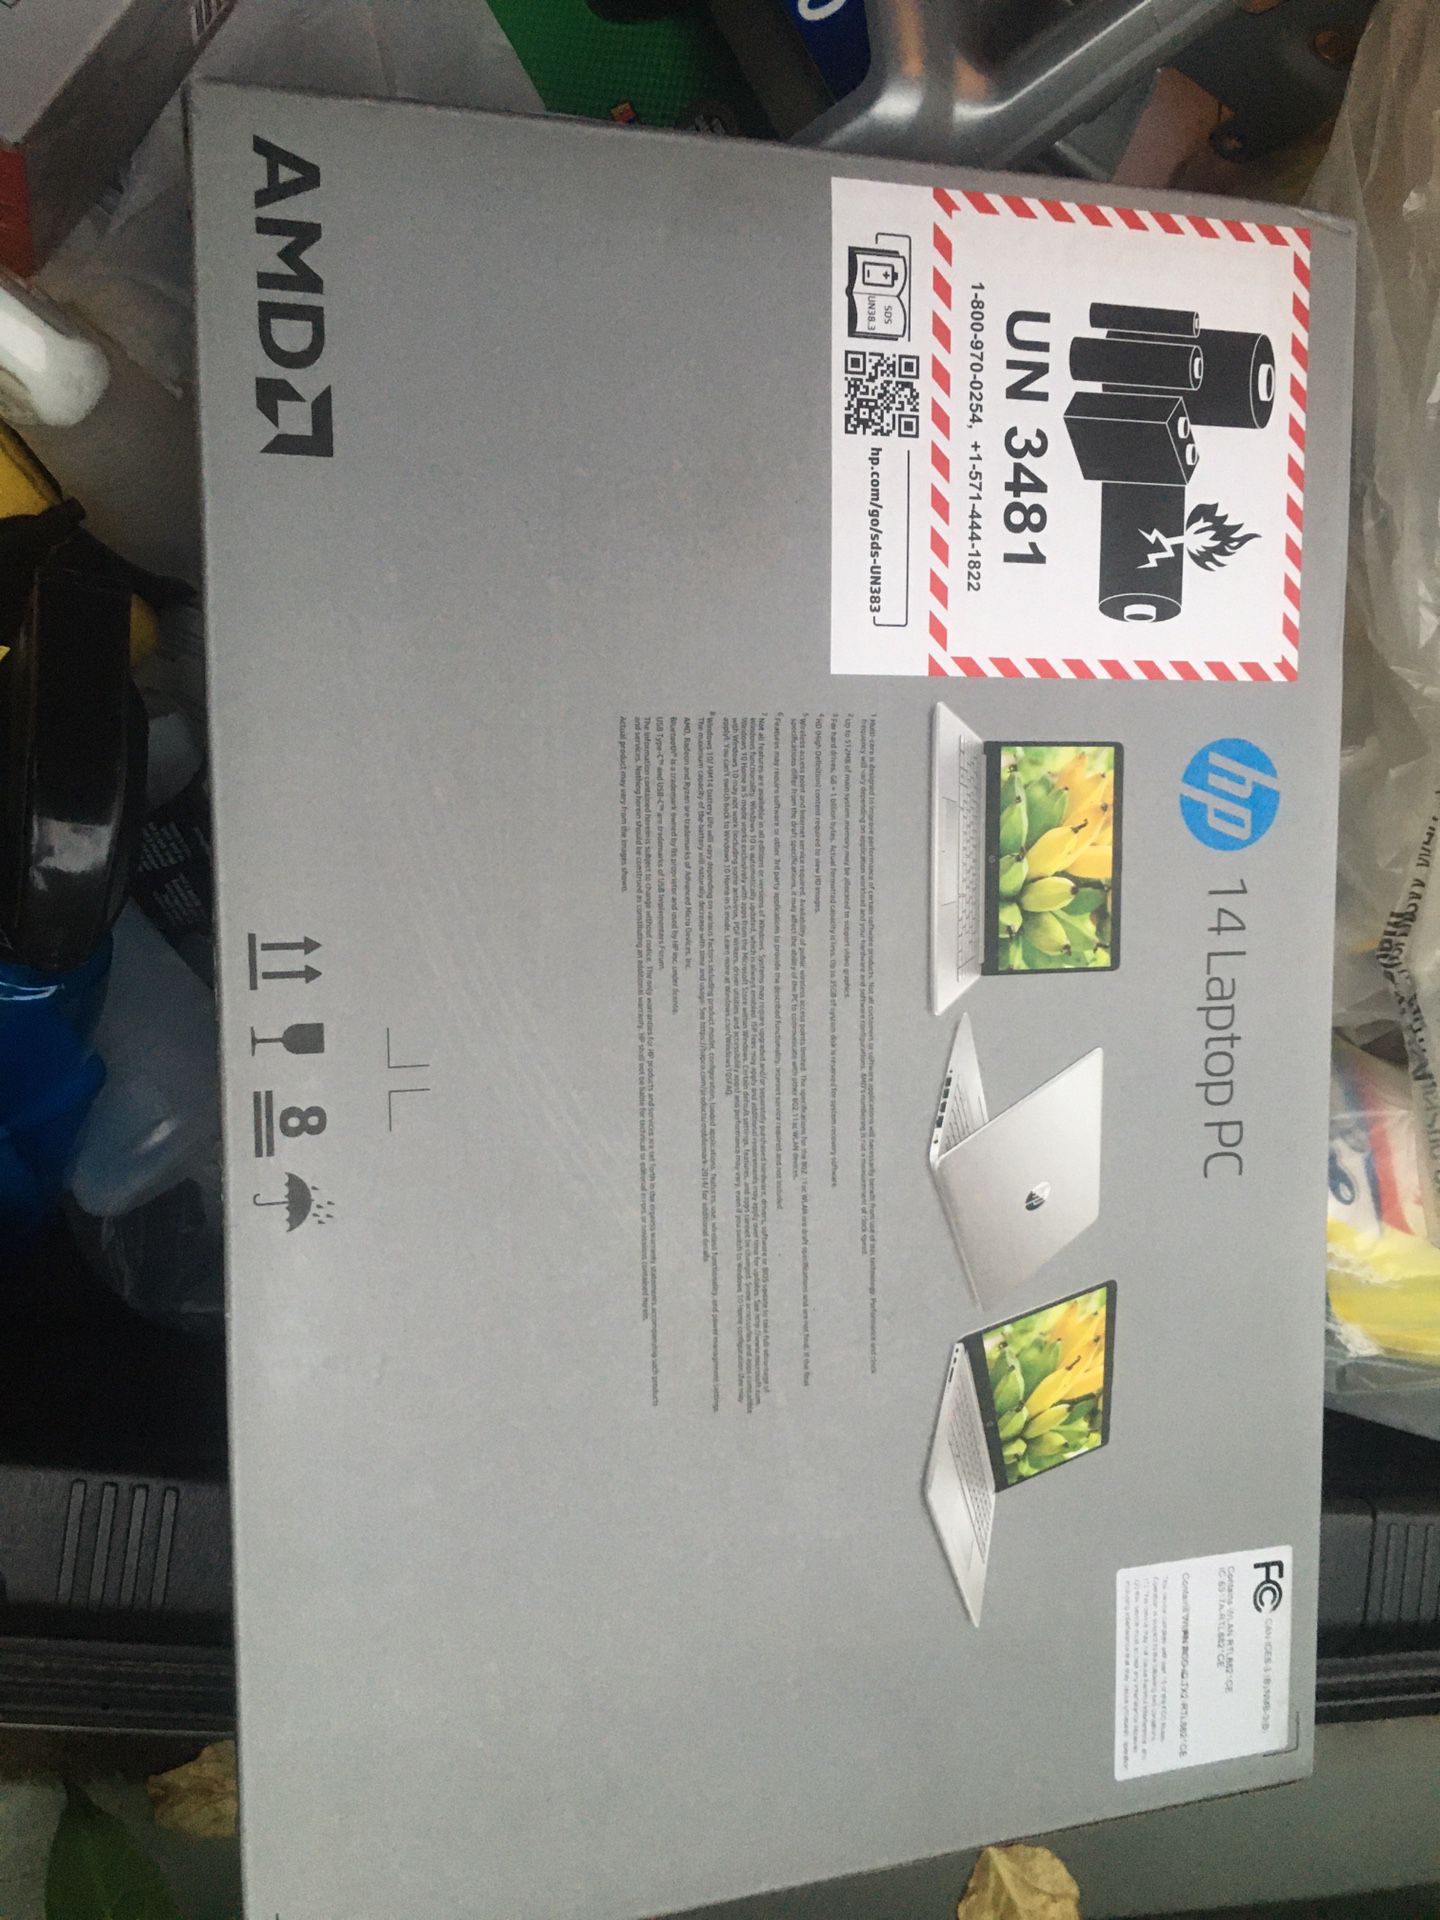 HP Laptop Brand New never opened